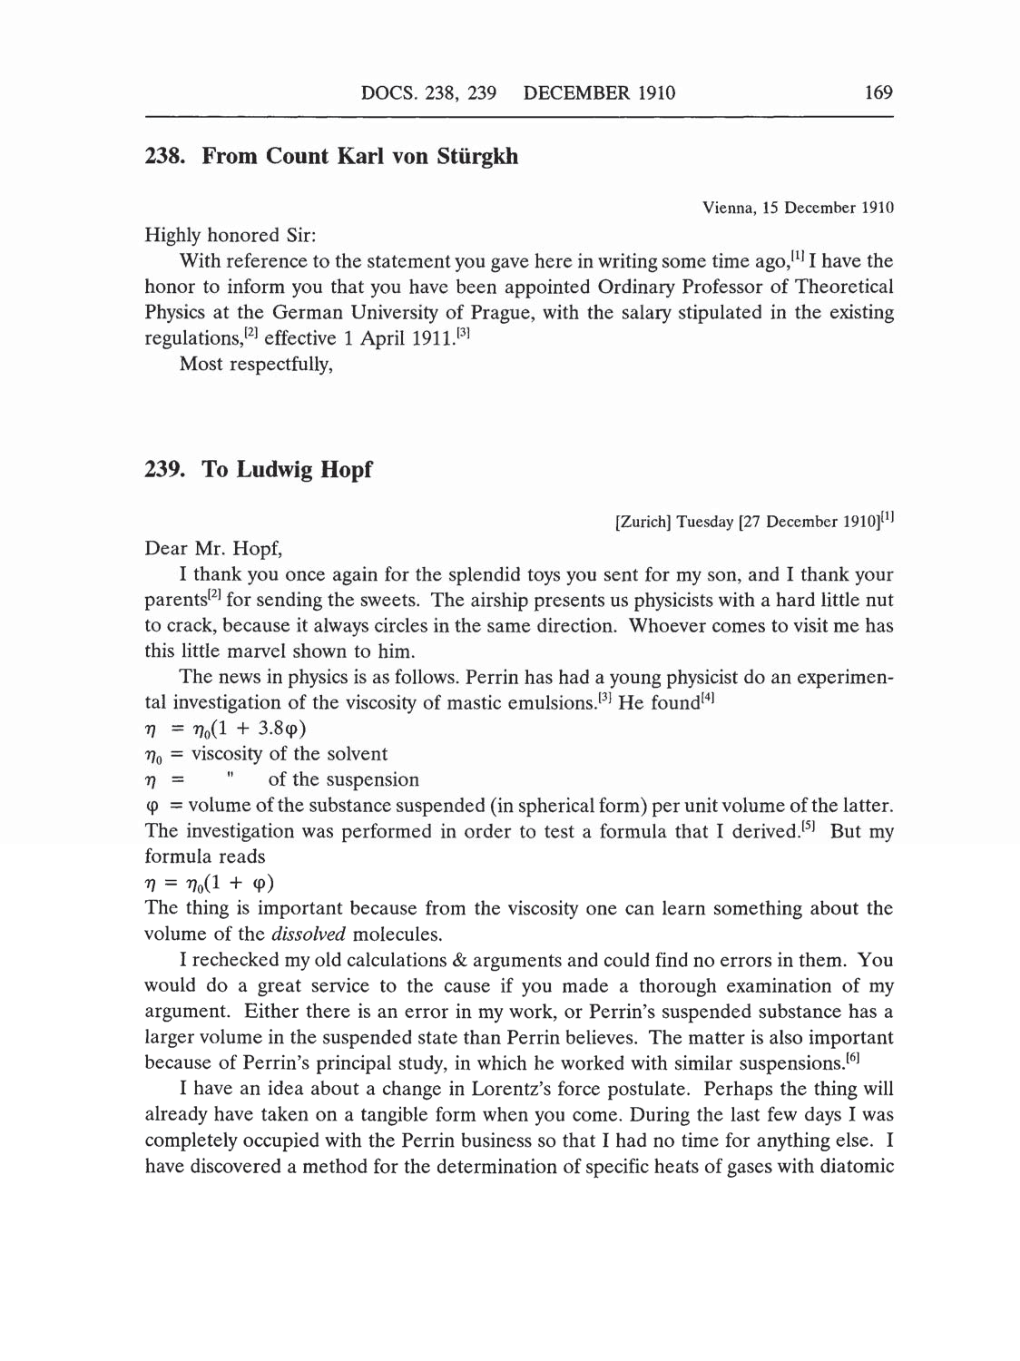 Volume 5: The Swiss Years: Correspondence, 1902-1914 (English translation supplement) page 169